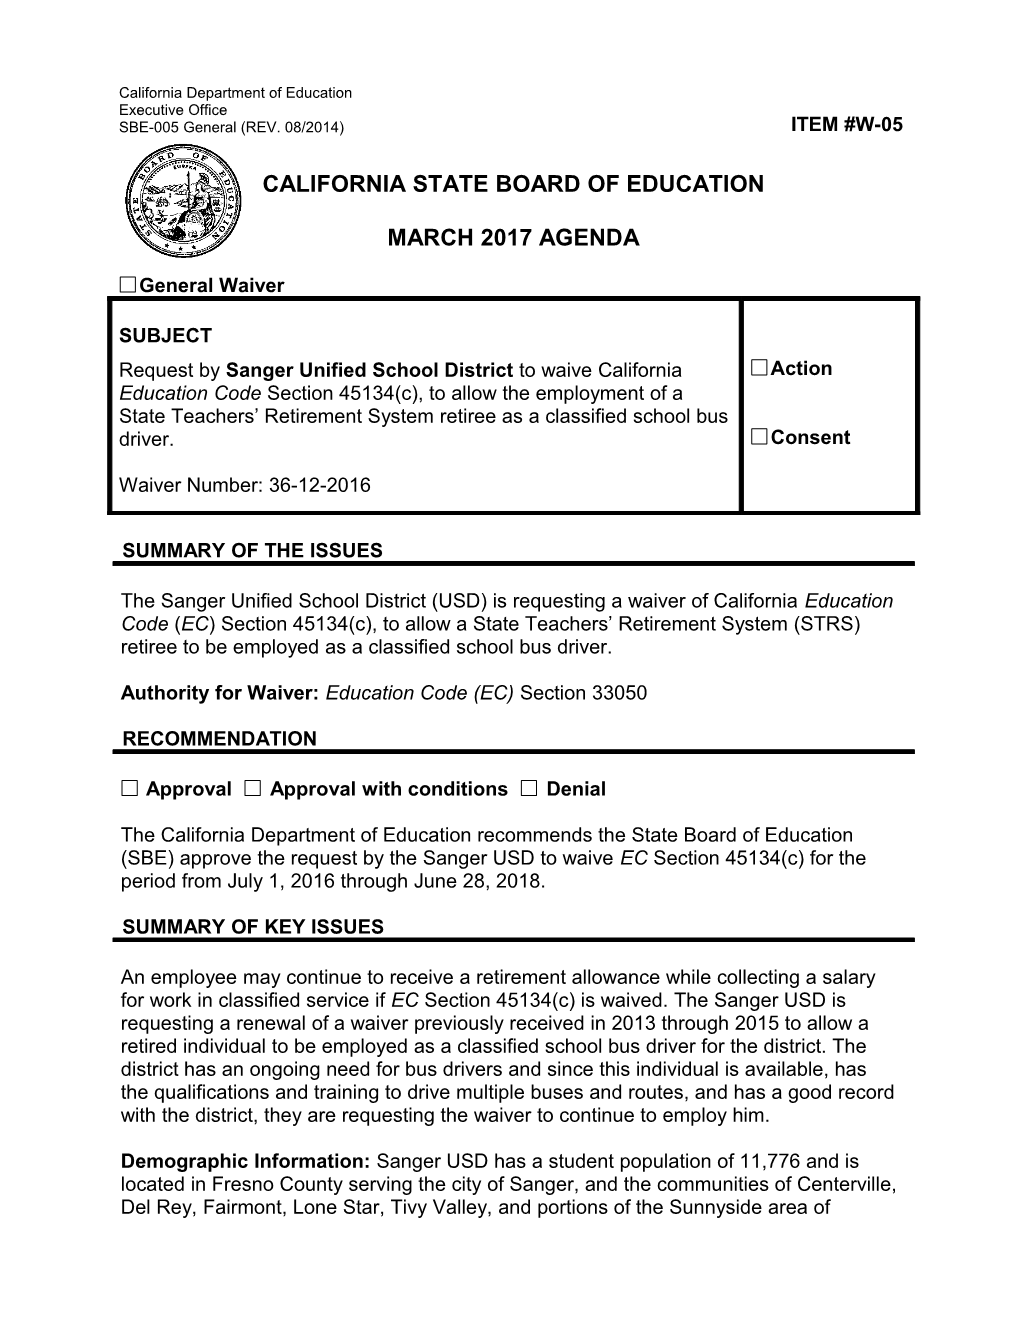 March 2017 Waiver Item W-05 - Meeting Agendas (CA State Board of Education)